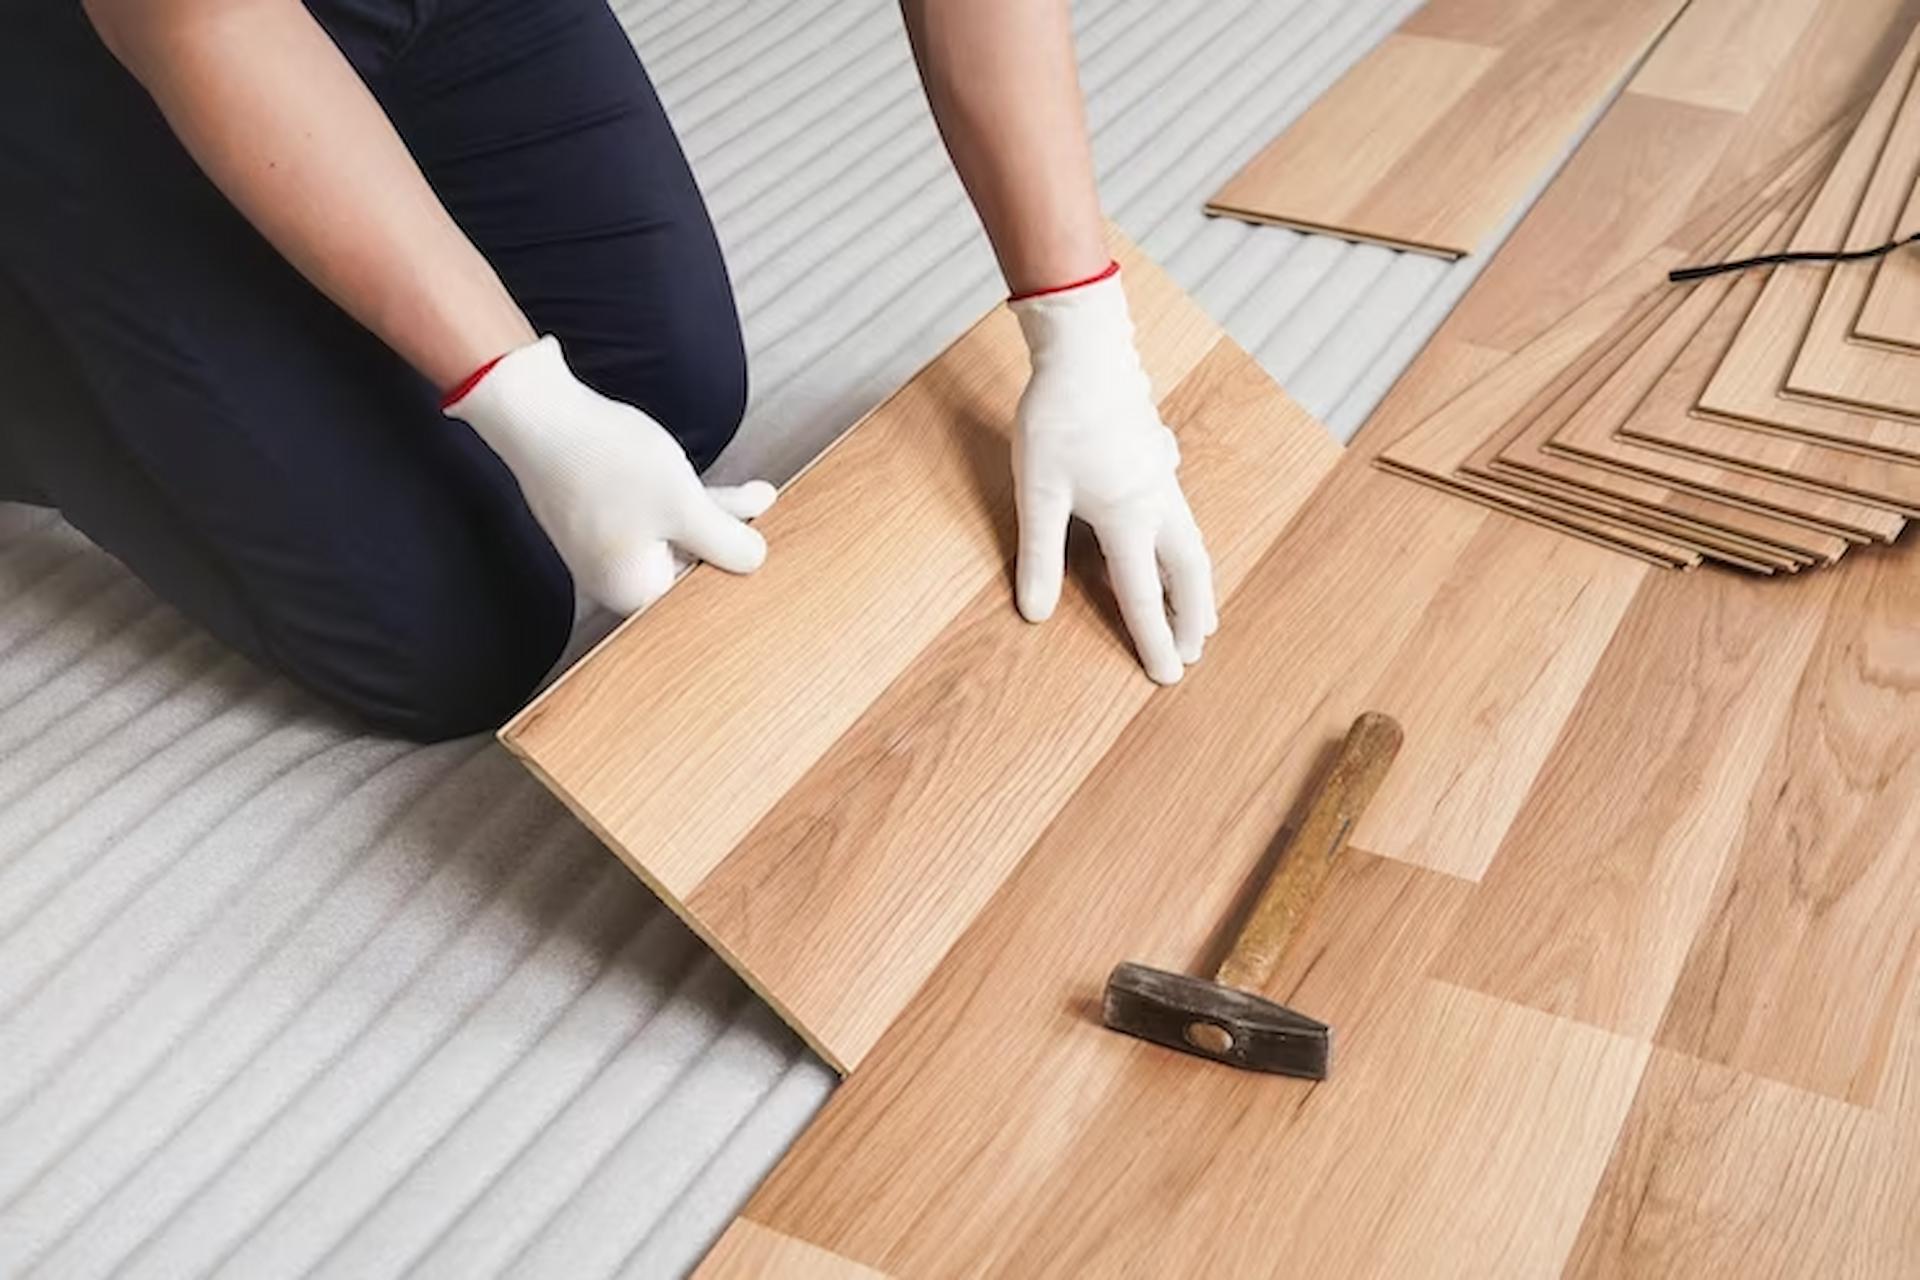 Discover elegant and durable flooring options offered by handyman services in Edmond, OK